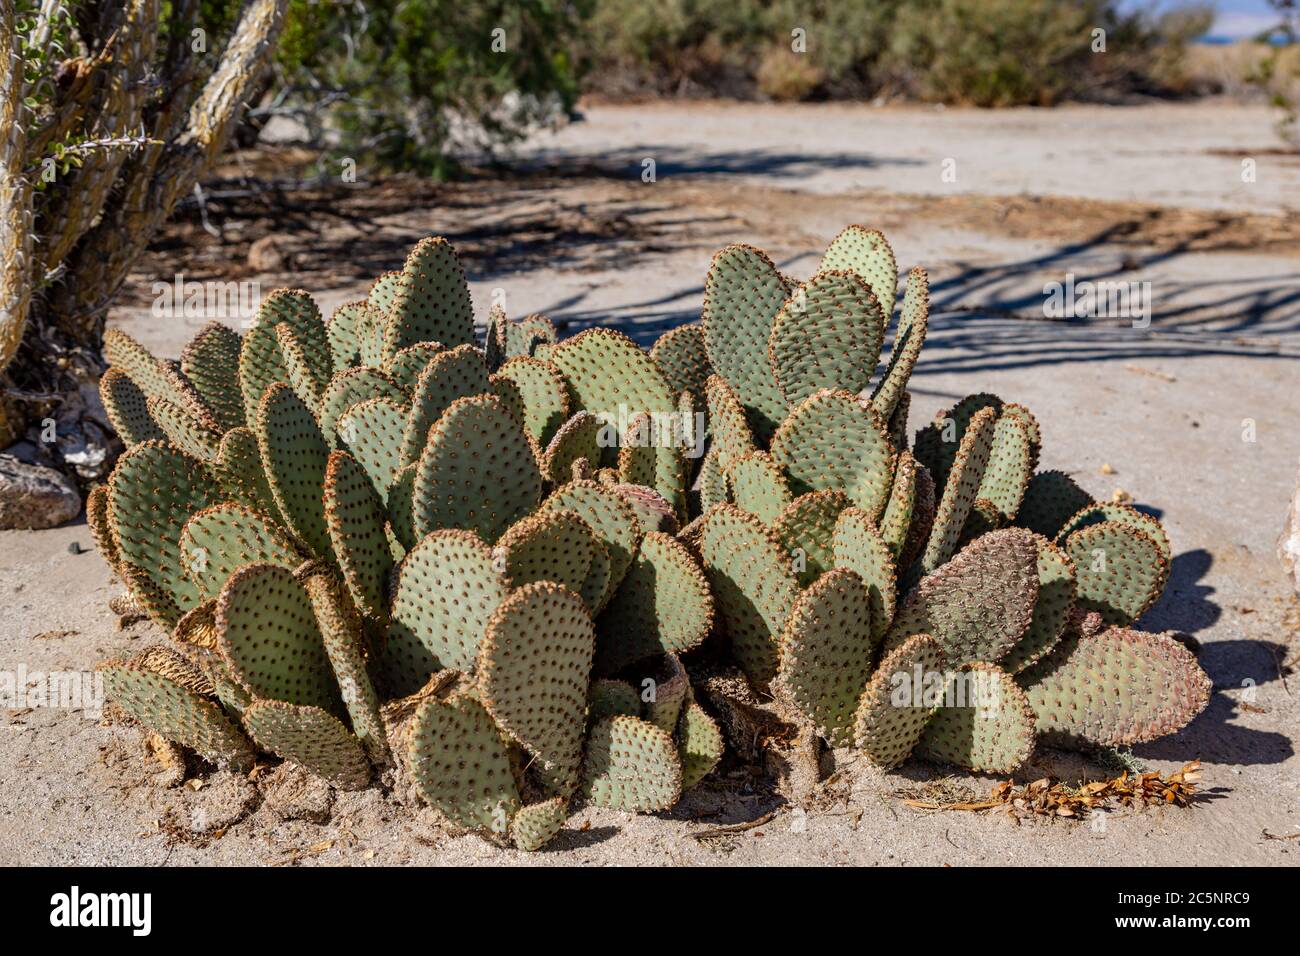 A cactus growing in the Californian desert Stock Photo